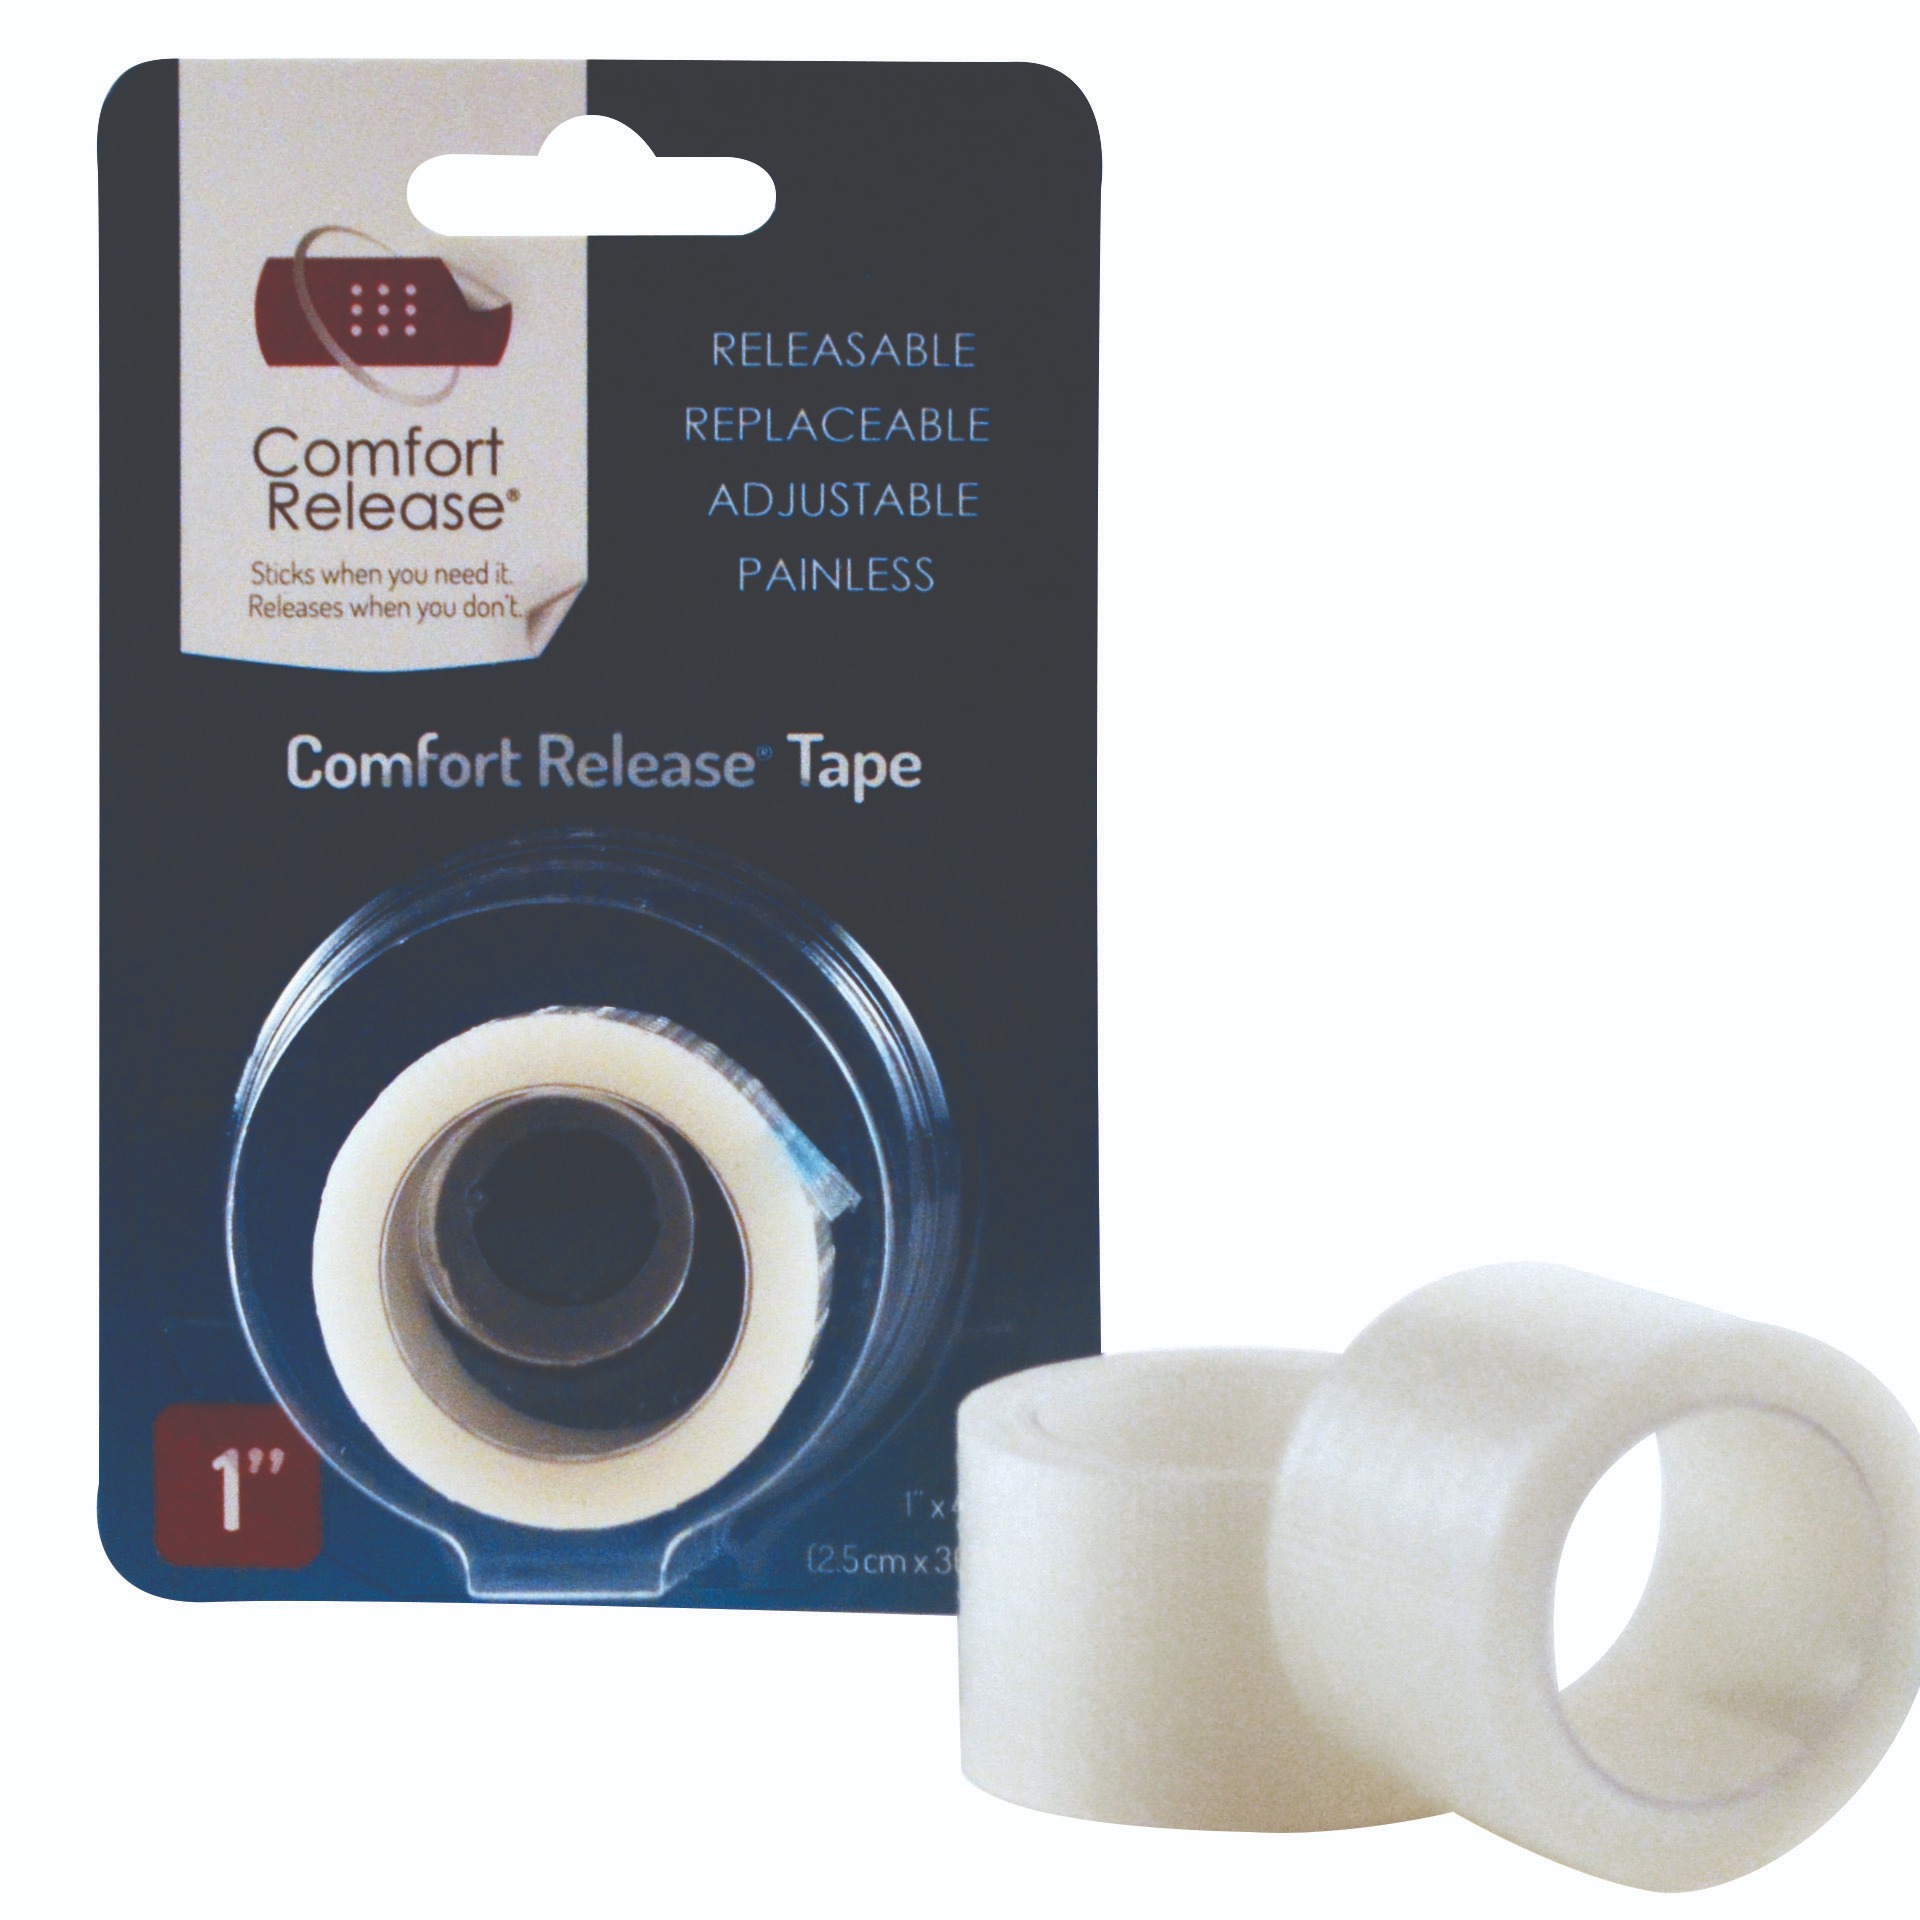 1" x 4 Yard Comfort Release Tape - OUT OF STOCK